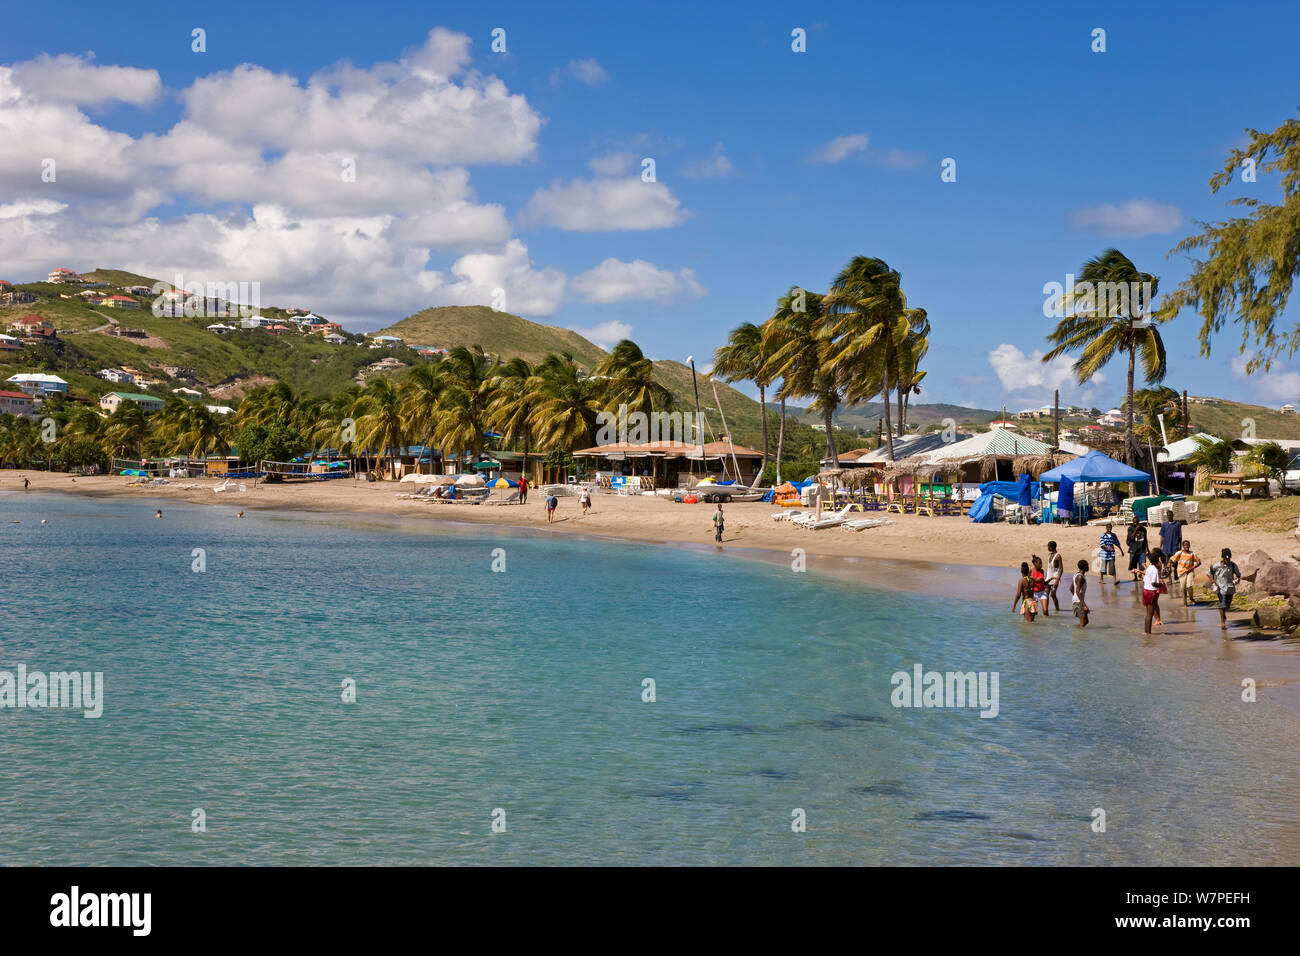 Frigate Bay Beach, St Kitts, St Kitts e Nevis, Isole Sottovento, Piccole Antille, Caraibi, West Indies 2008 Foto Stock